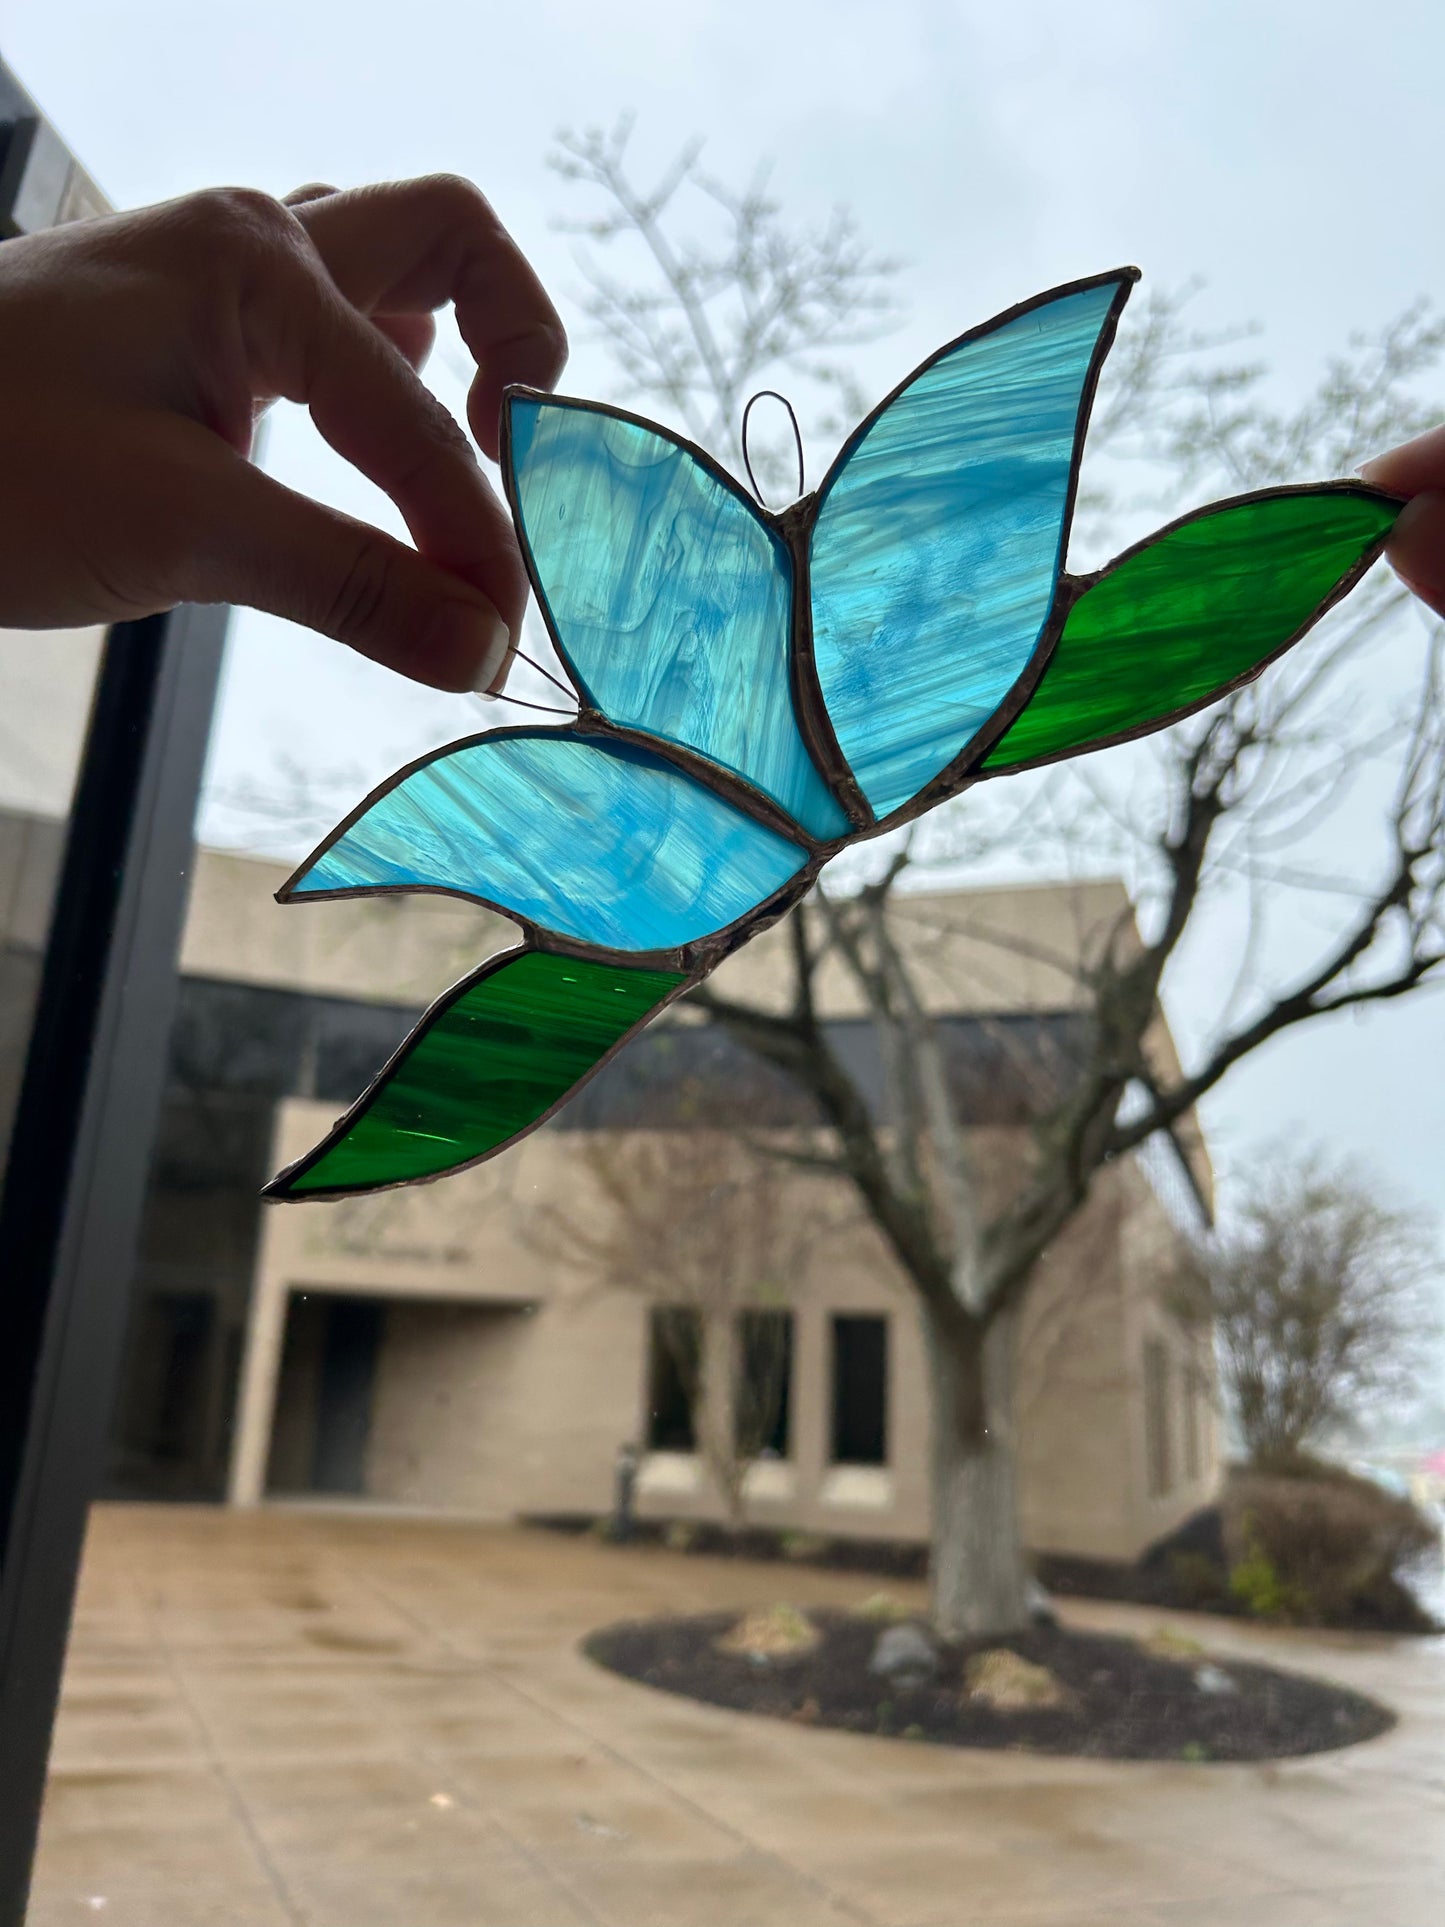 Beginner Stained Glass class, April 6, 3-5:30 pm